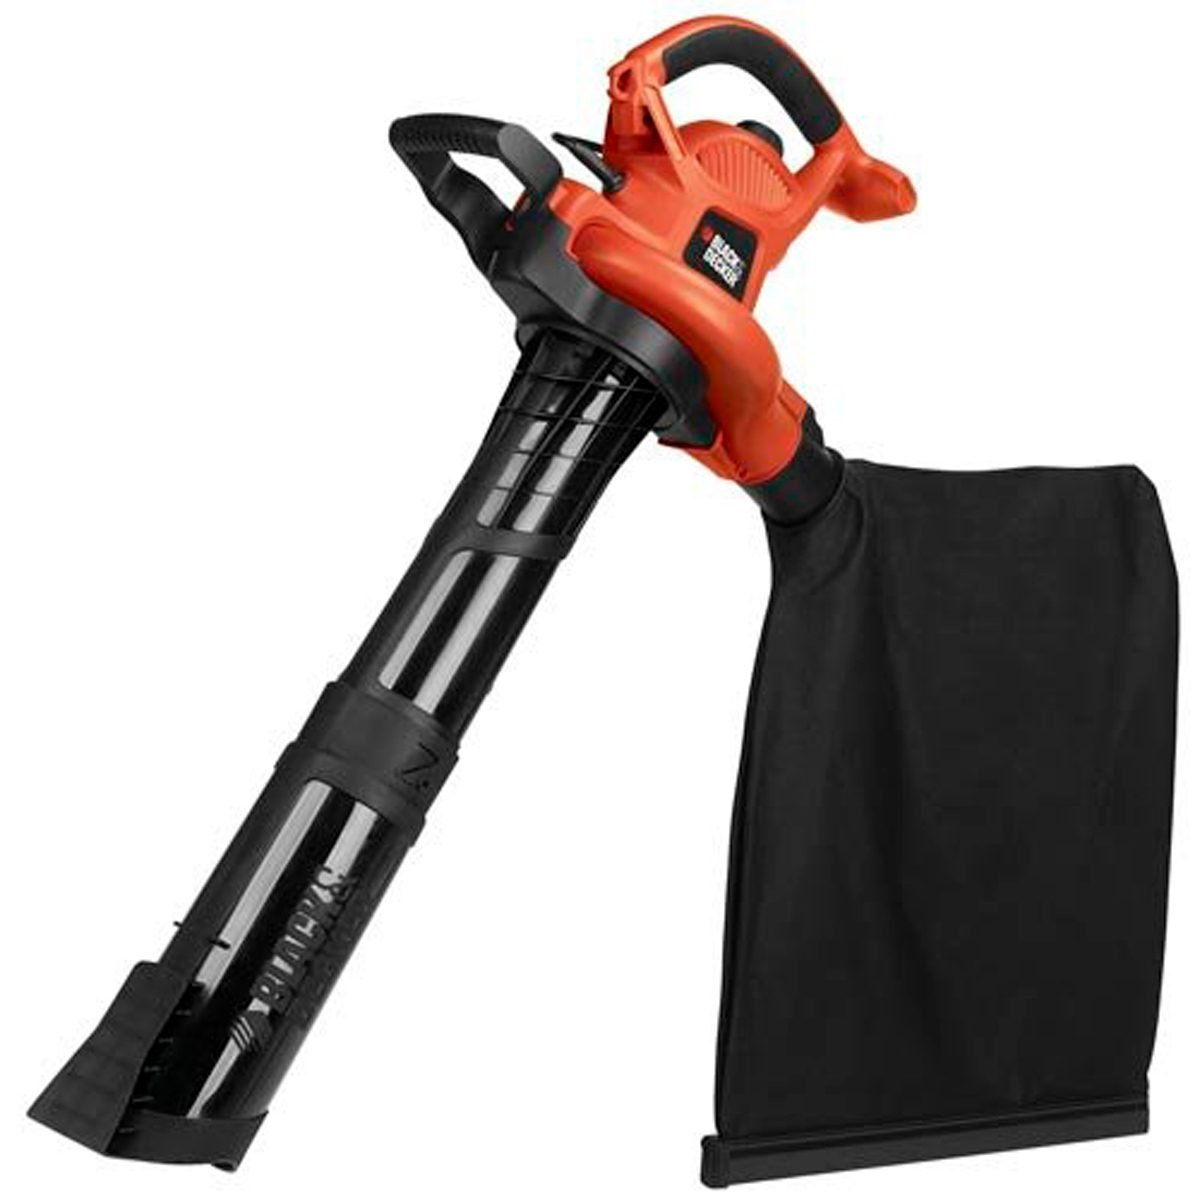 Best Reviewed Leaf Blowers On Amazon Family Handyman